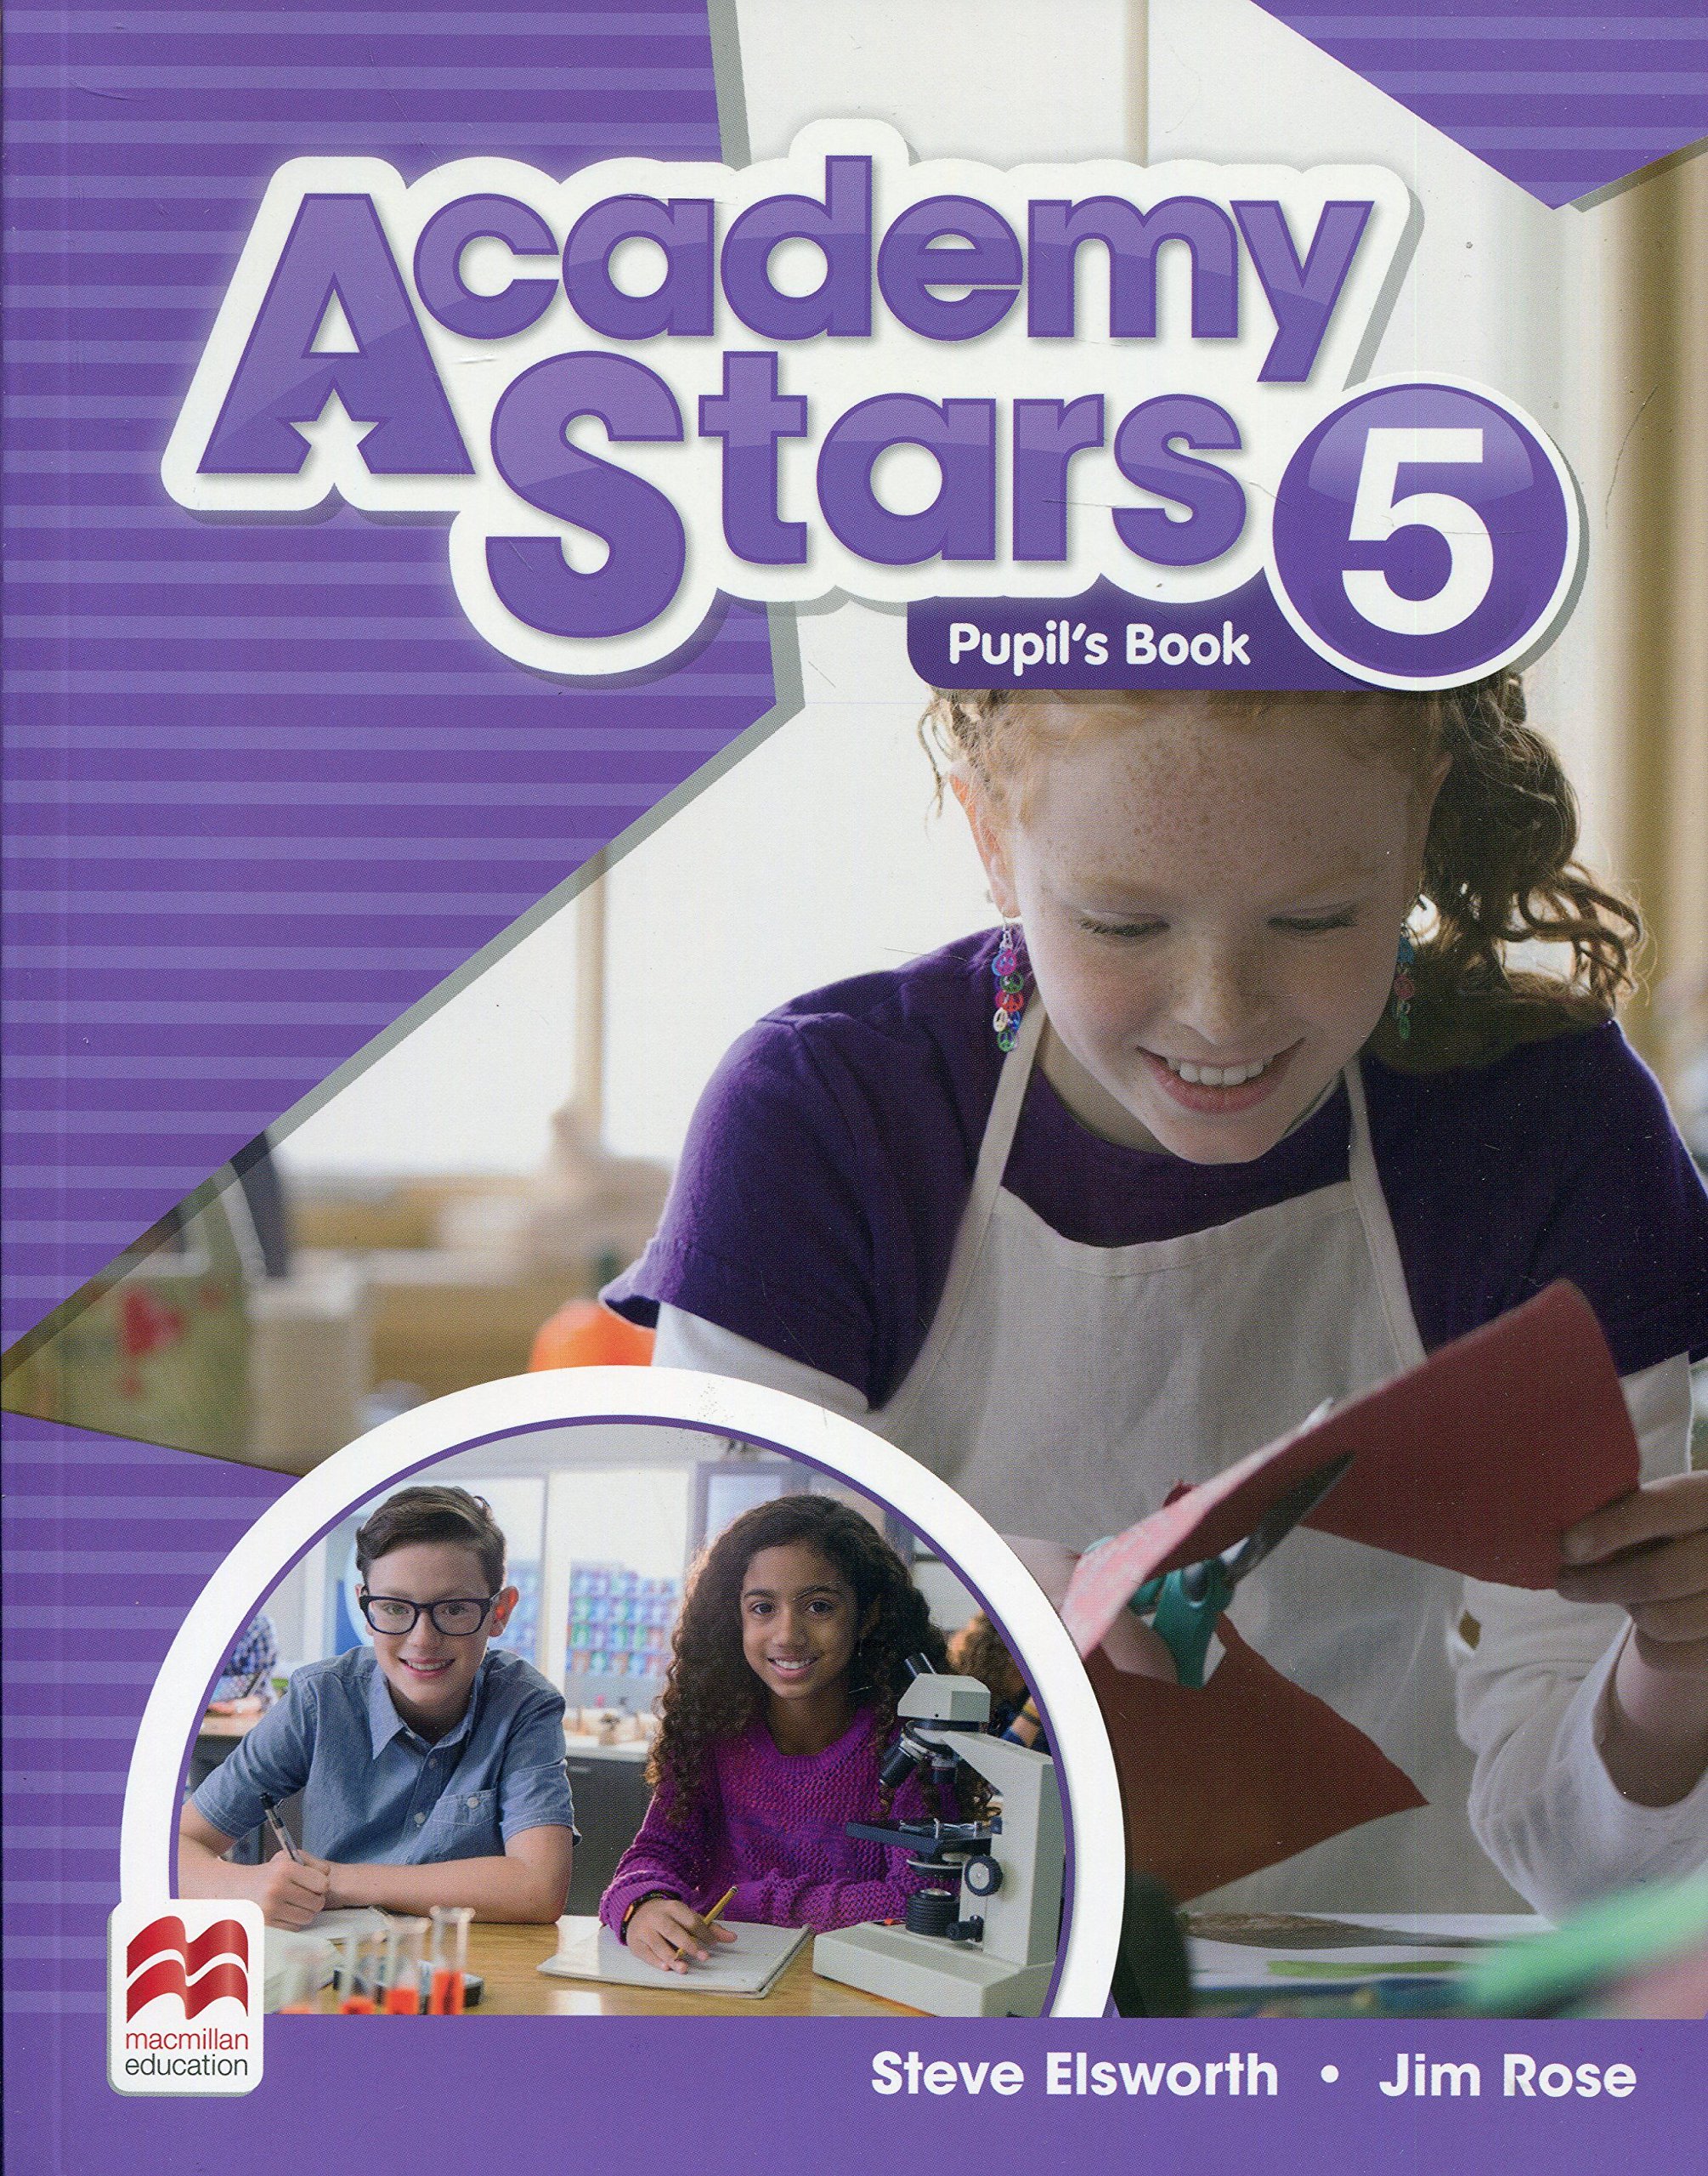 ACADEMY STARS 5 Pupil's Book Pack